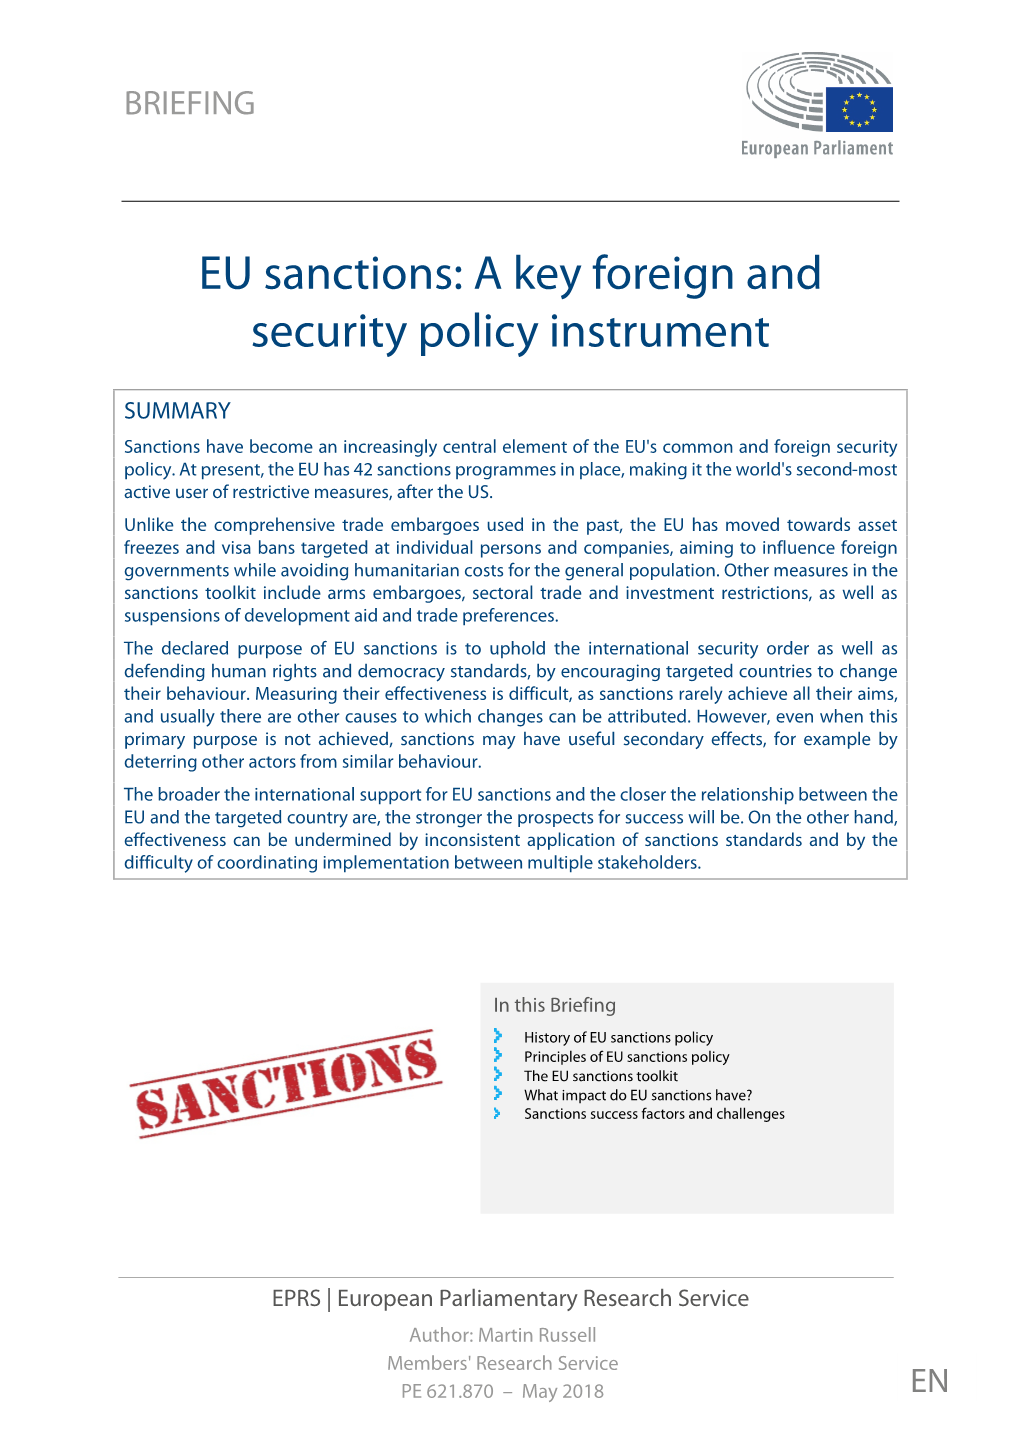 EU Sanctions: a Key Foreign and Security Policy Instrument